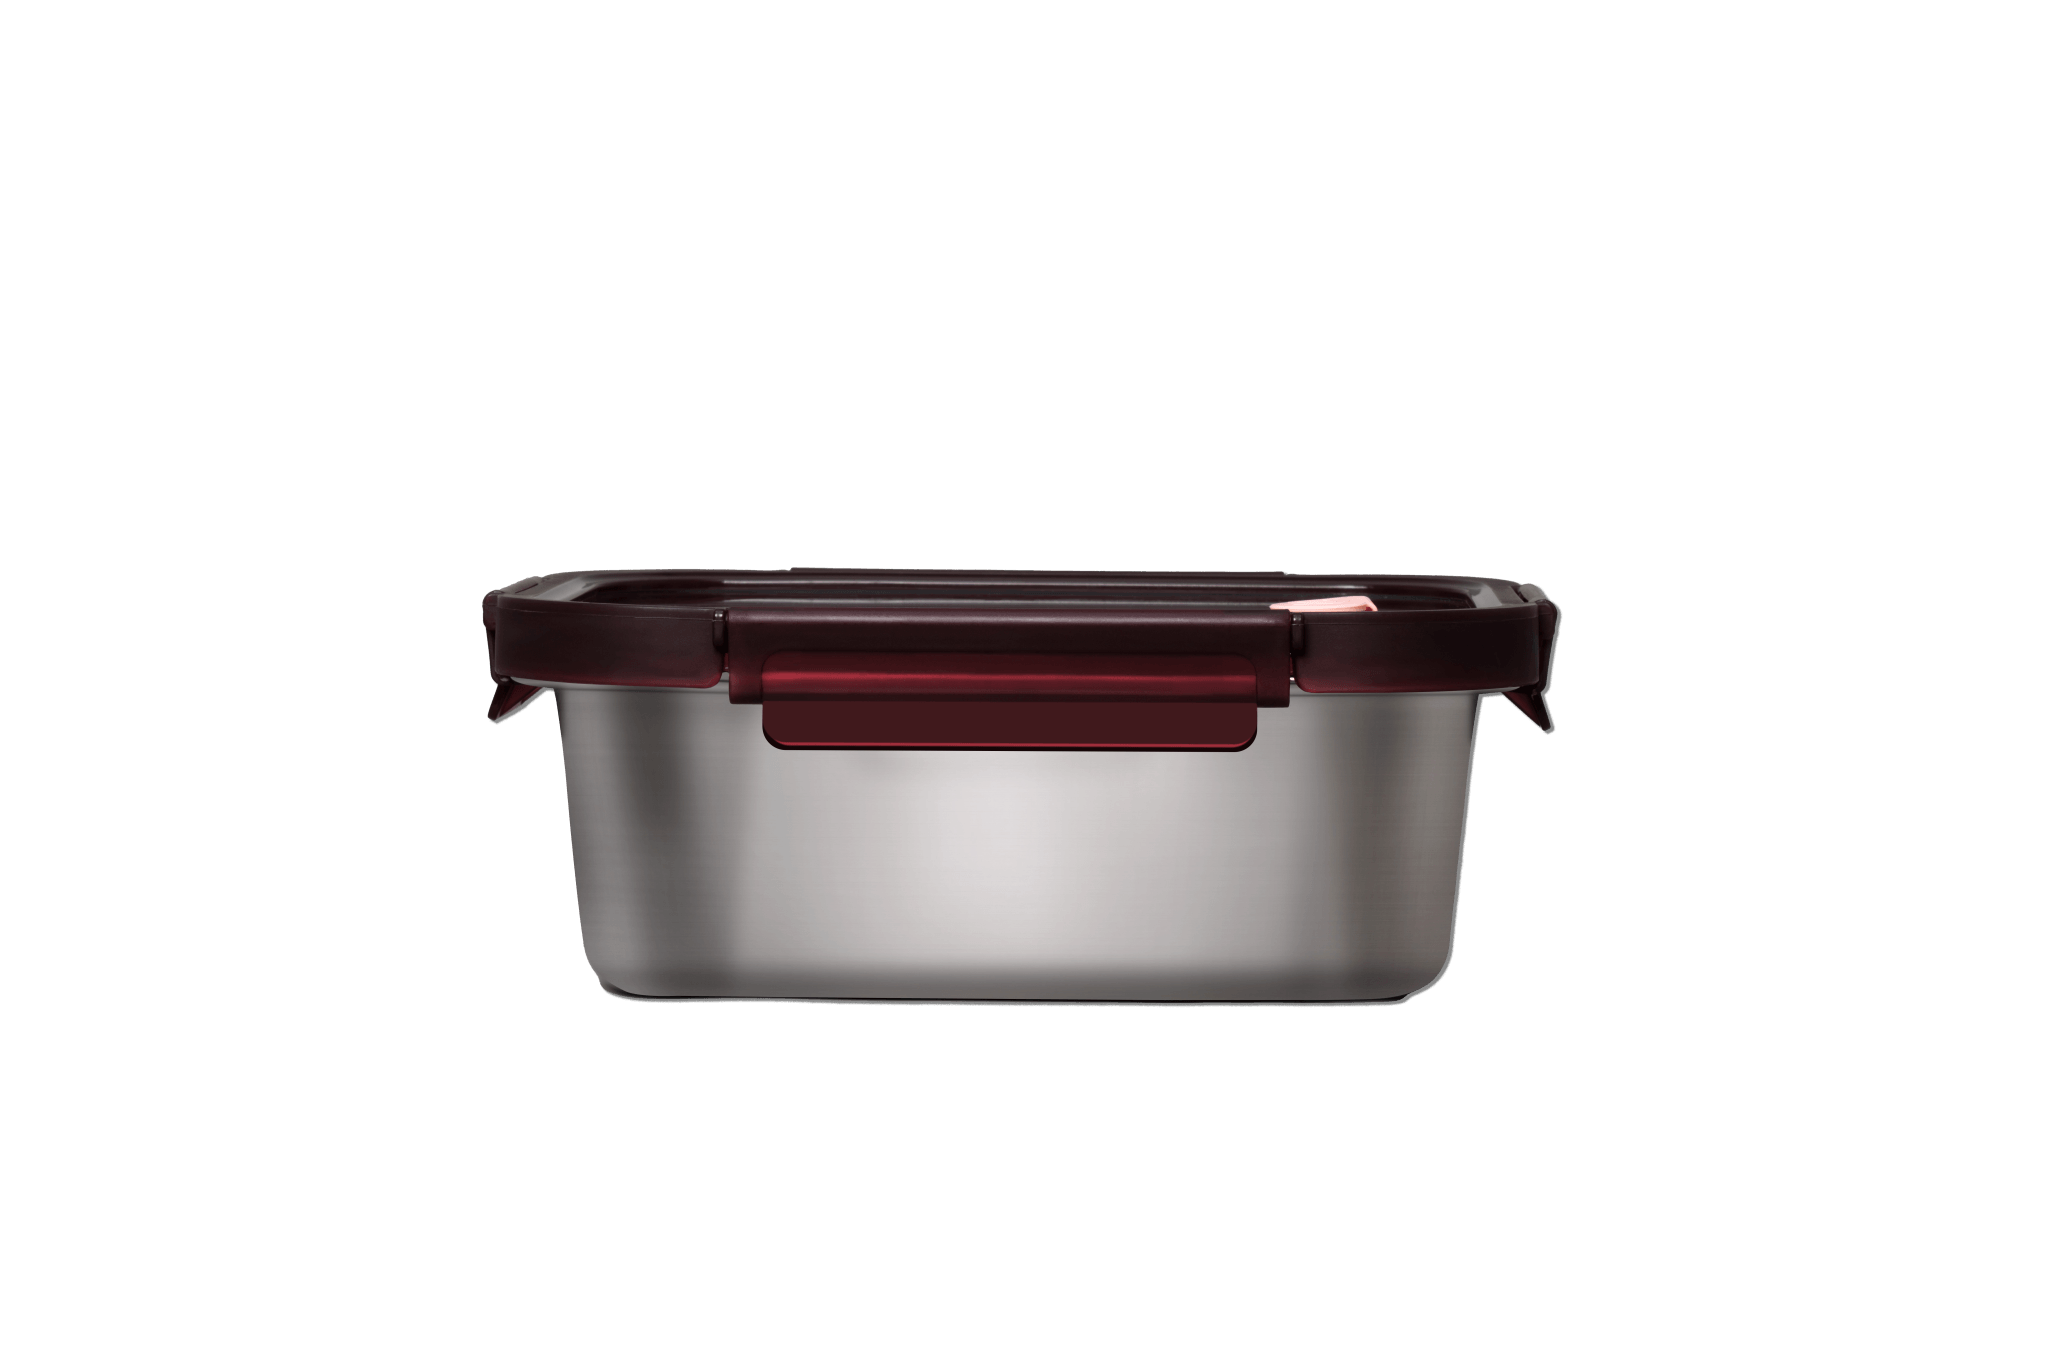 Lock & Lock] Modular Banchan Containers - Stainless Steel (8 Sizes) –  Gochujar